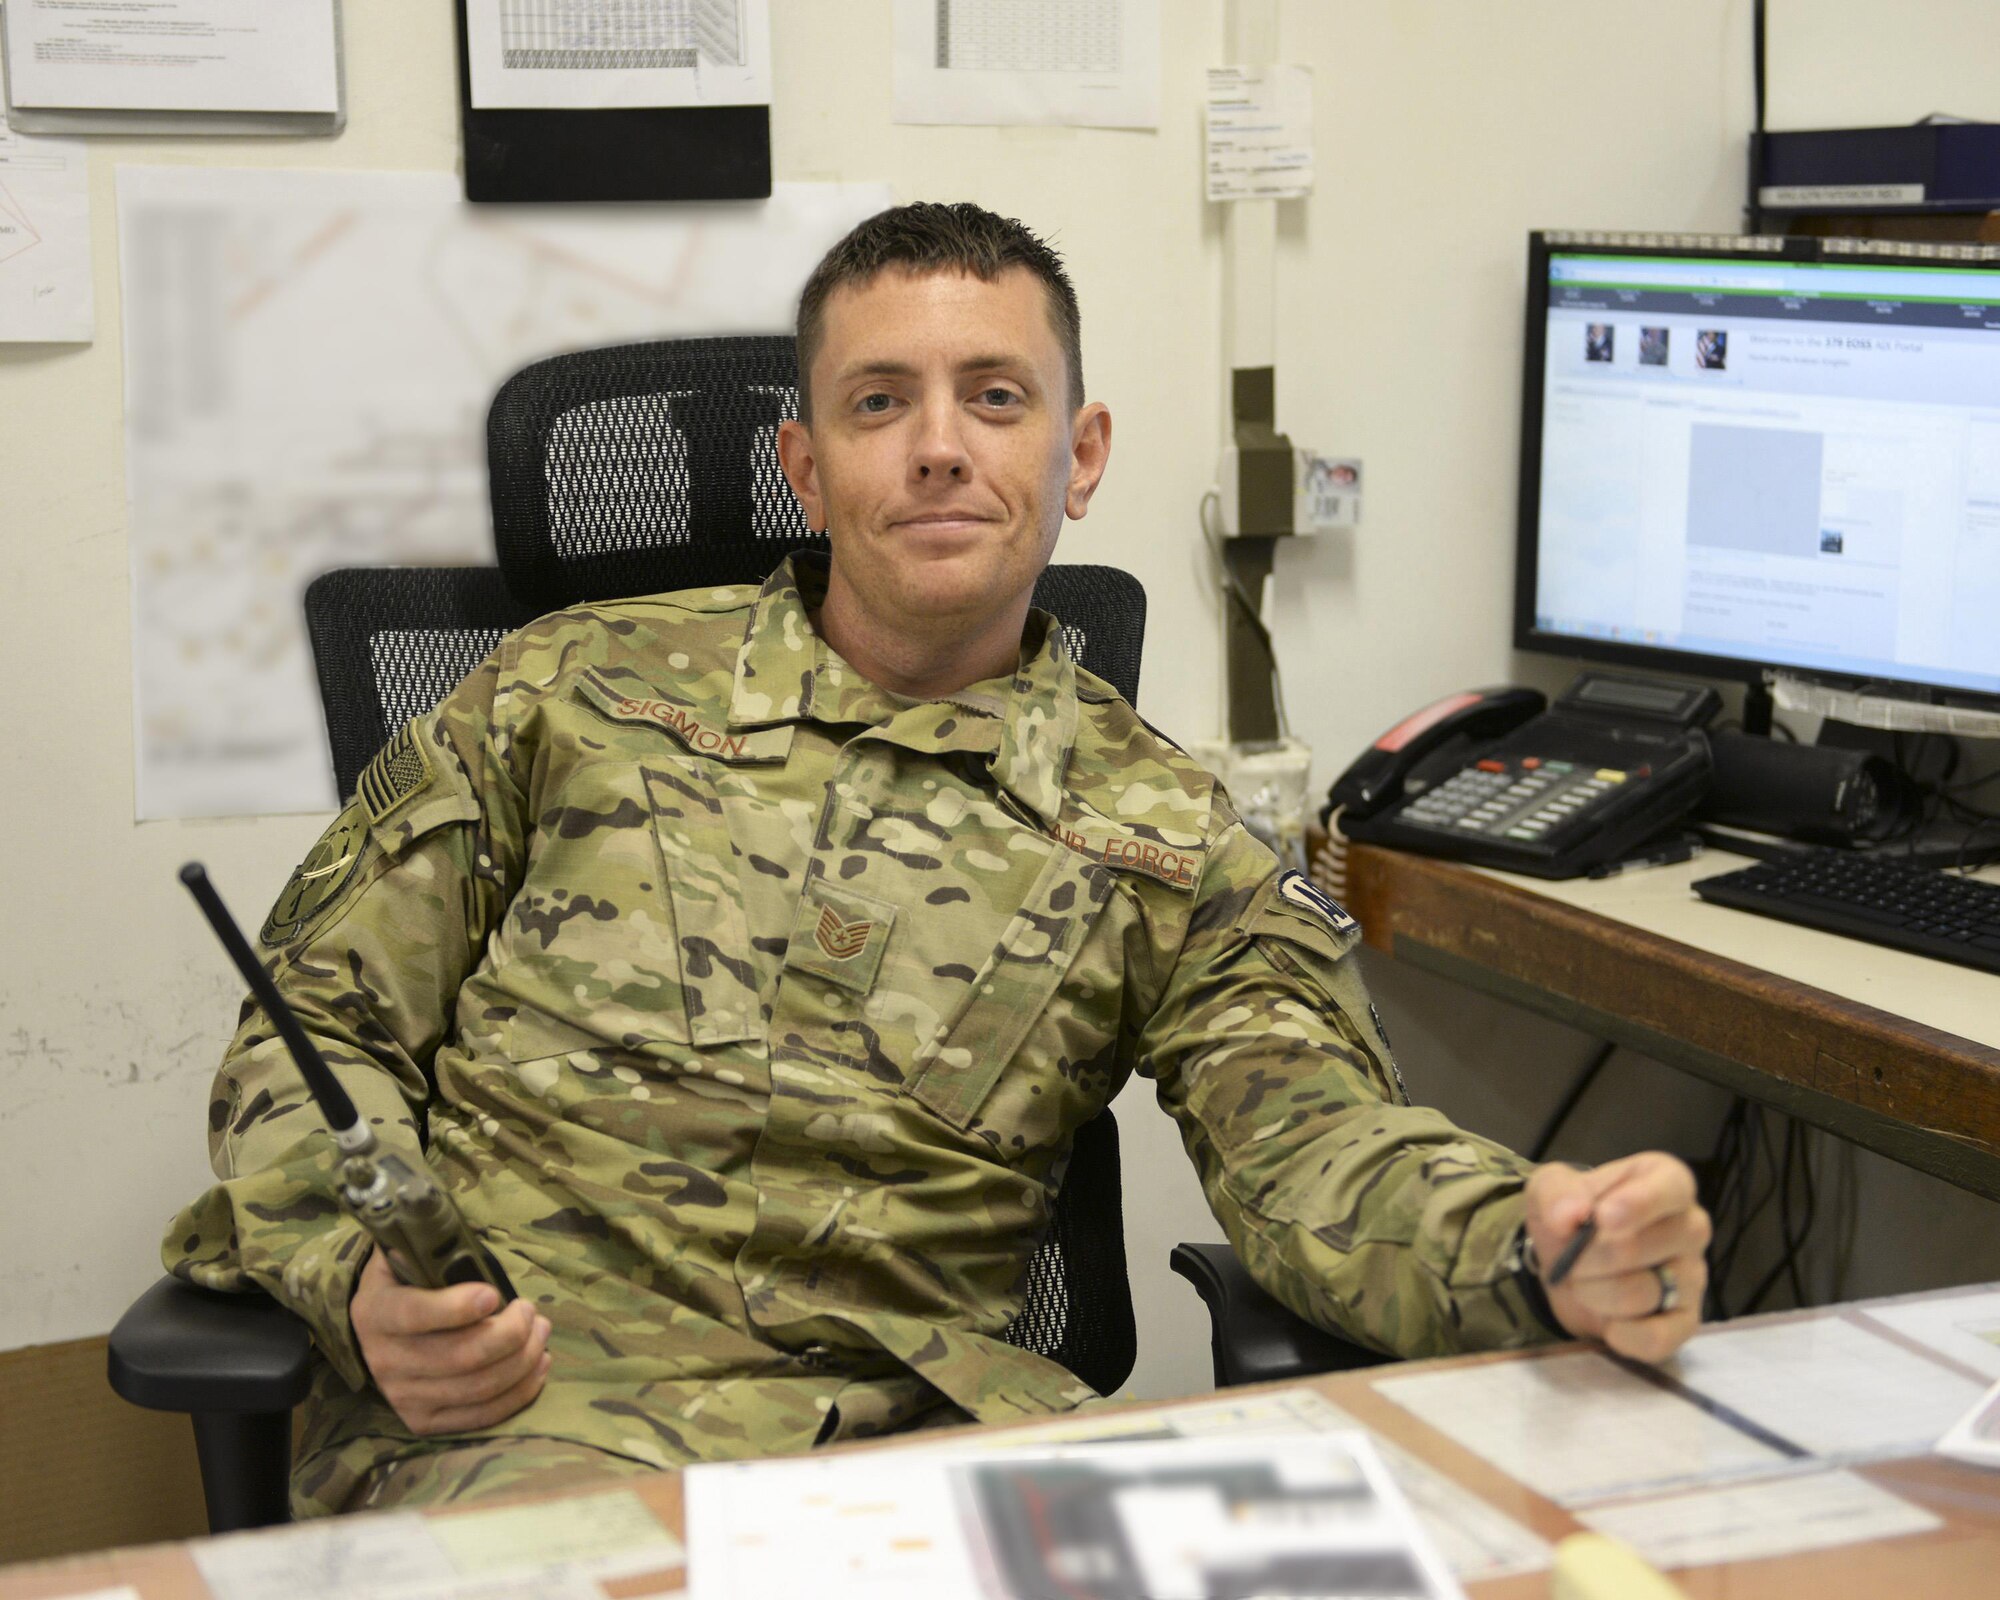 U.S. Air Force Tech. Sgt. Joseph Sigman, airfield manager assigned to the 379th Expeditionary Office of Strategic Services, oversees daily airfield management activities at Al Udeid, Air Force Base, Qatar, June 22, 2017. Airfield Management oversees more than 20 million square feet of airfield at Al Udeid in addition to overseeing the airfield driving program and filing all flight plans for flights arriving to and departing from the base. (U.S. Air National Guard photo by Tech. Sgt. Bradly A. Schneider/Released)